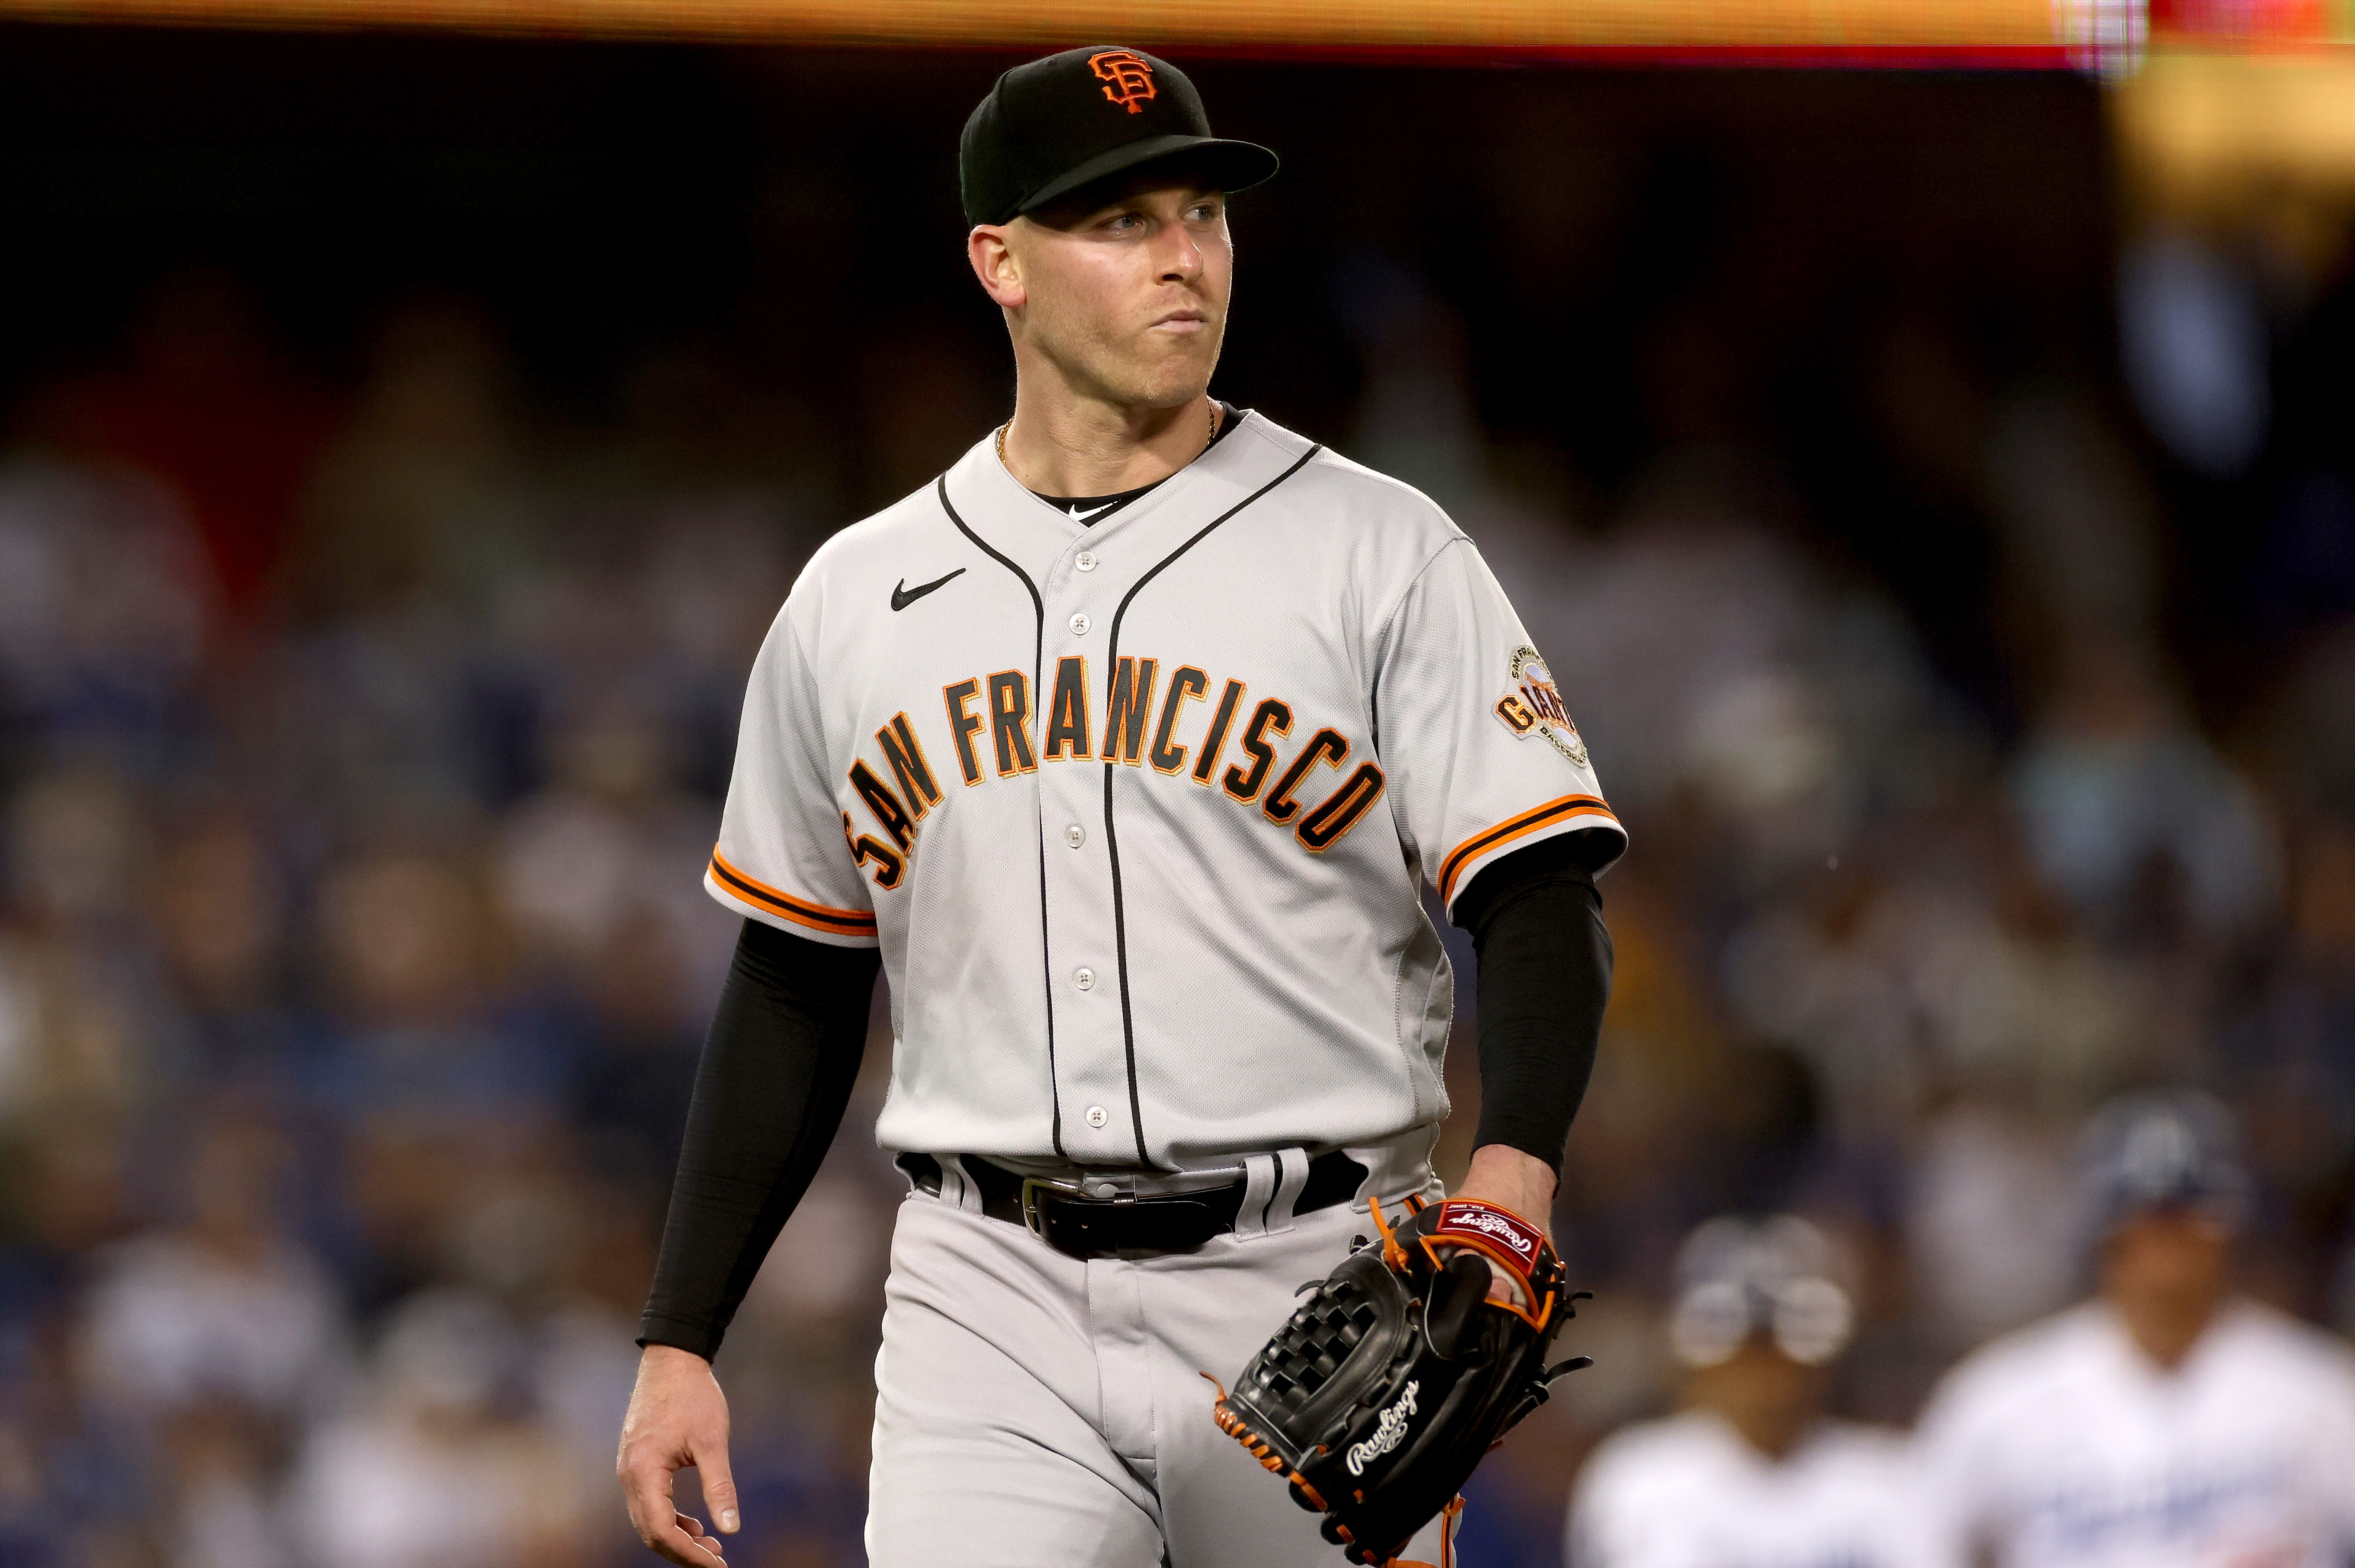 BR: SF Giants video clip